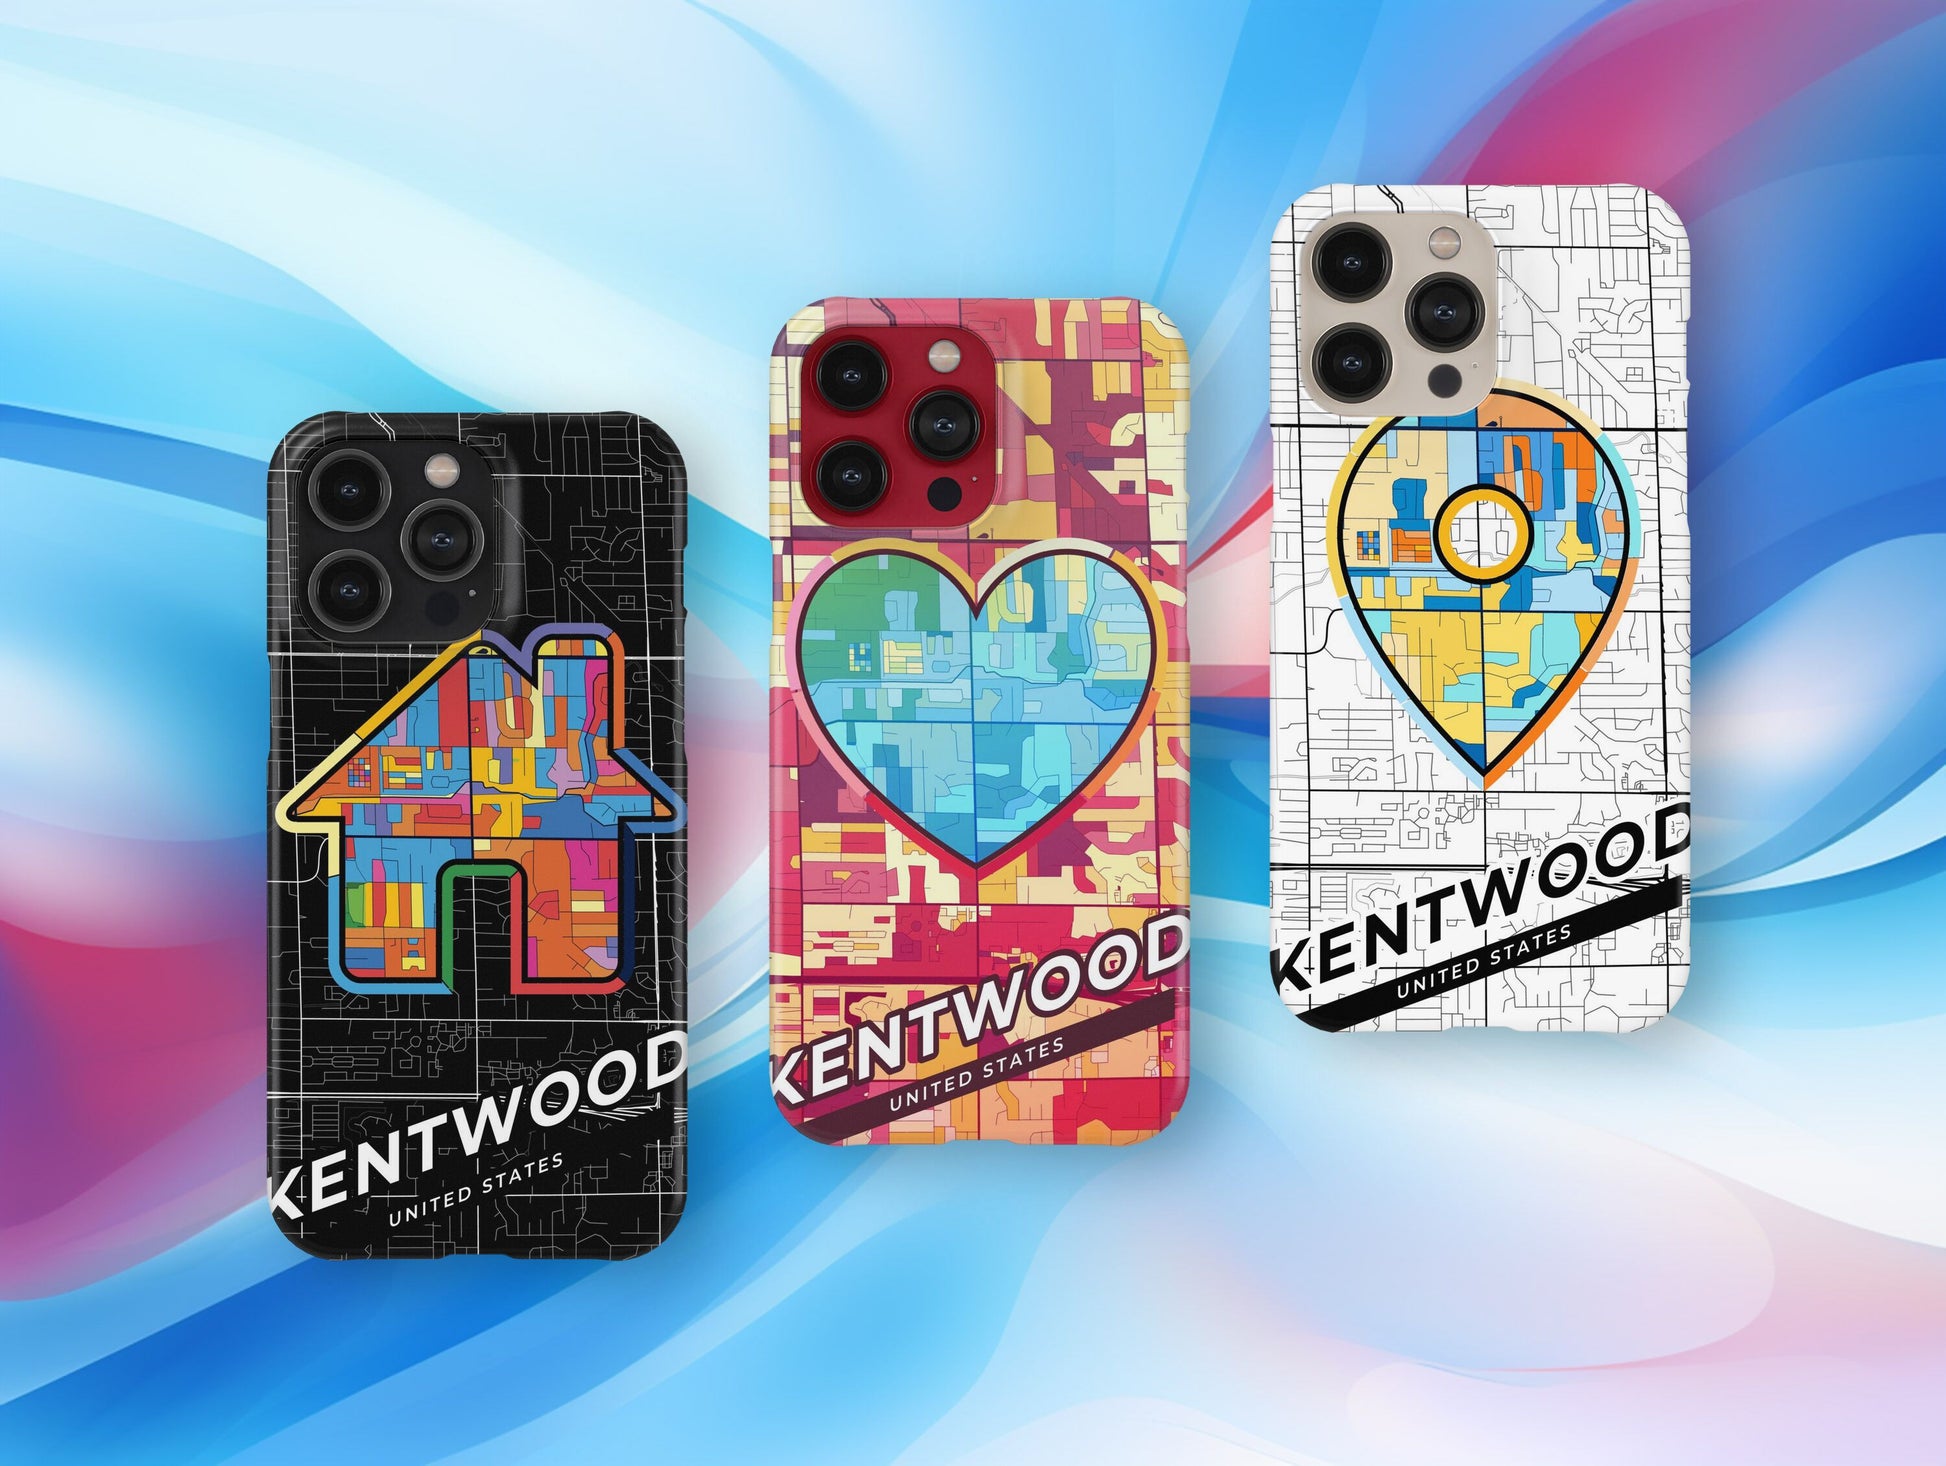 Kentwood Michigan slim phone case with colorful icon. Birthday, wedding or housewarming gift. Couple match cases.